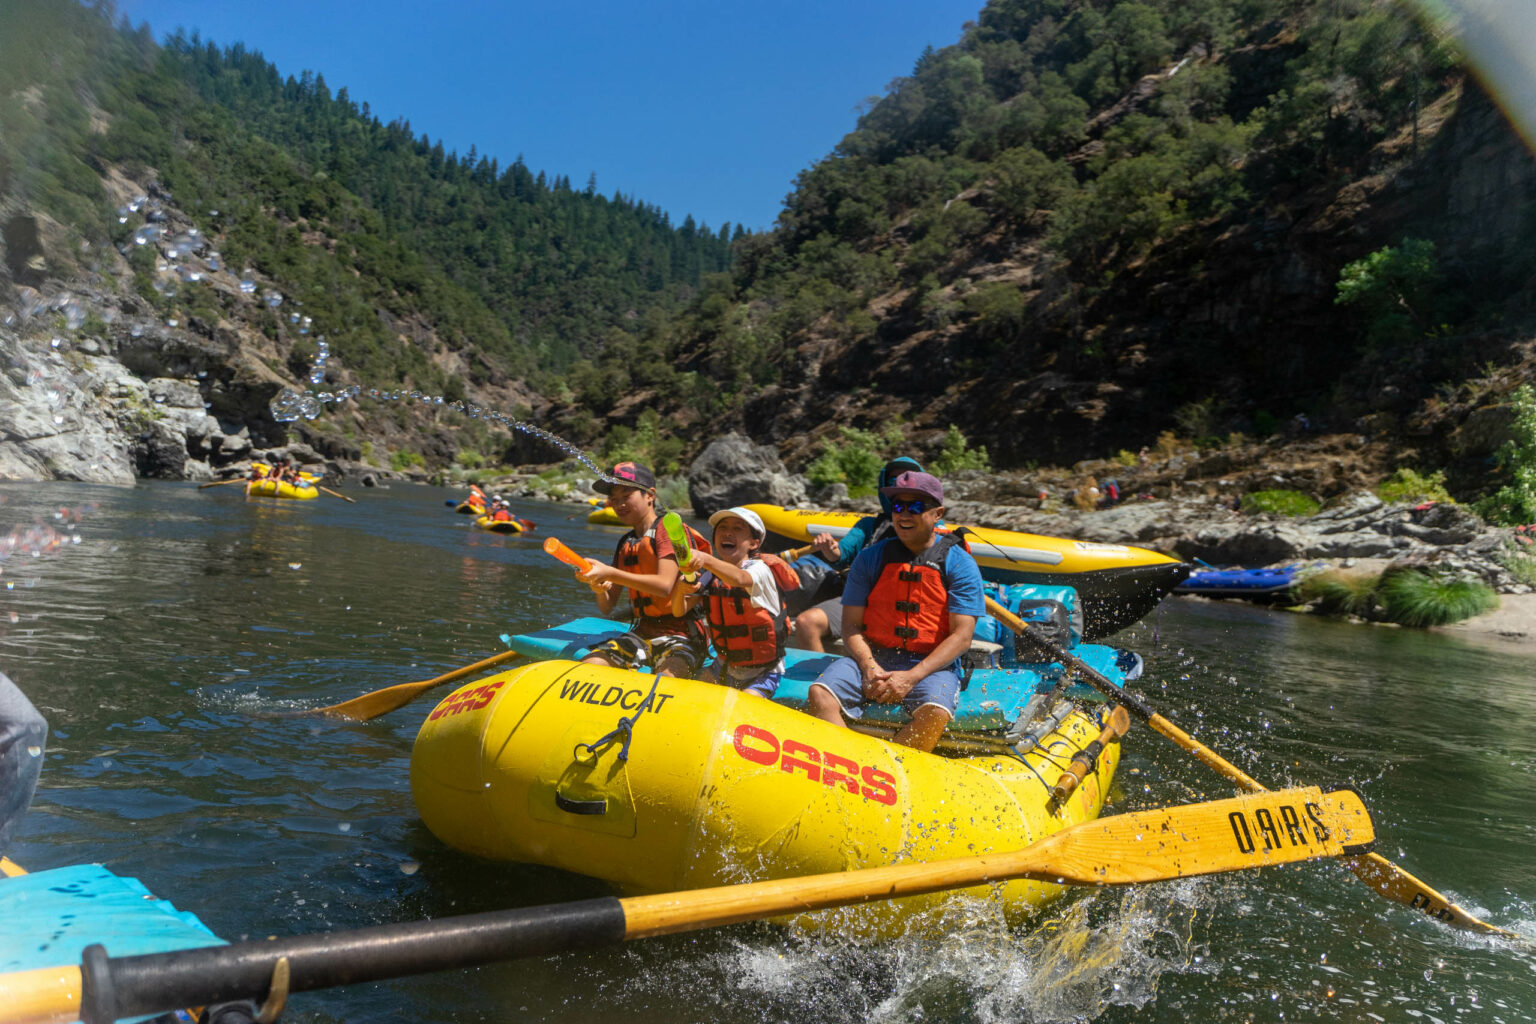 Family having fun with water guns while rafting on a river.